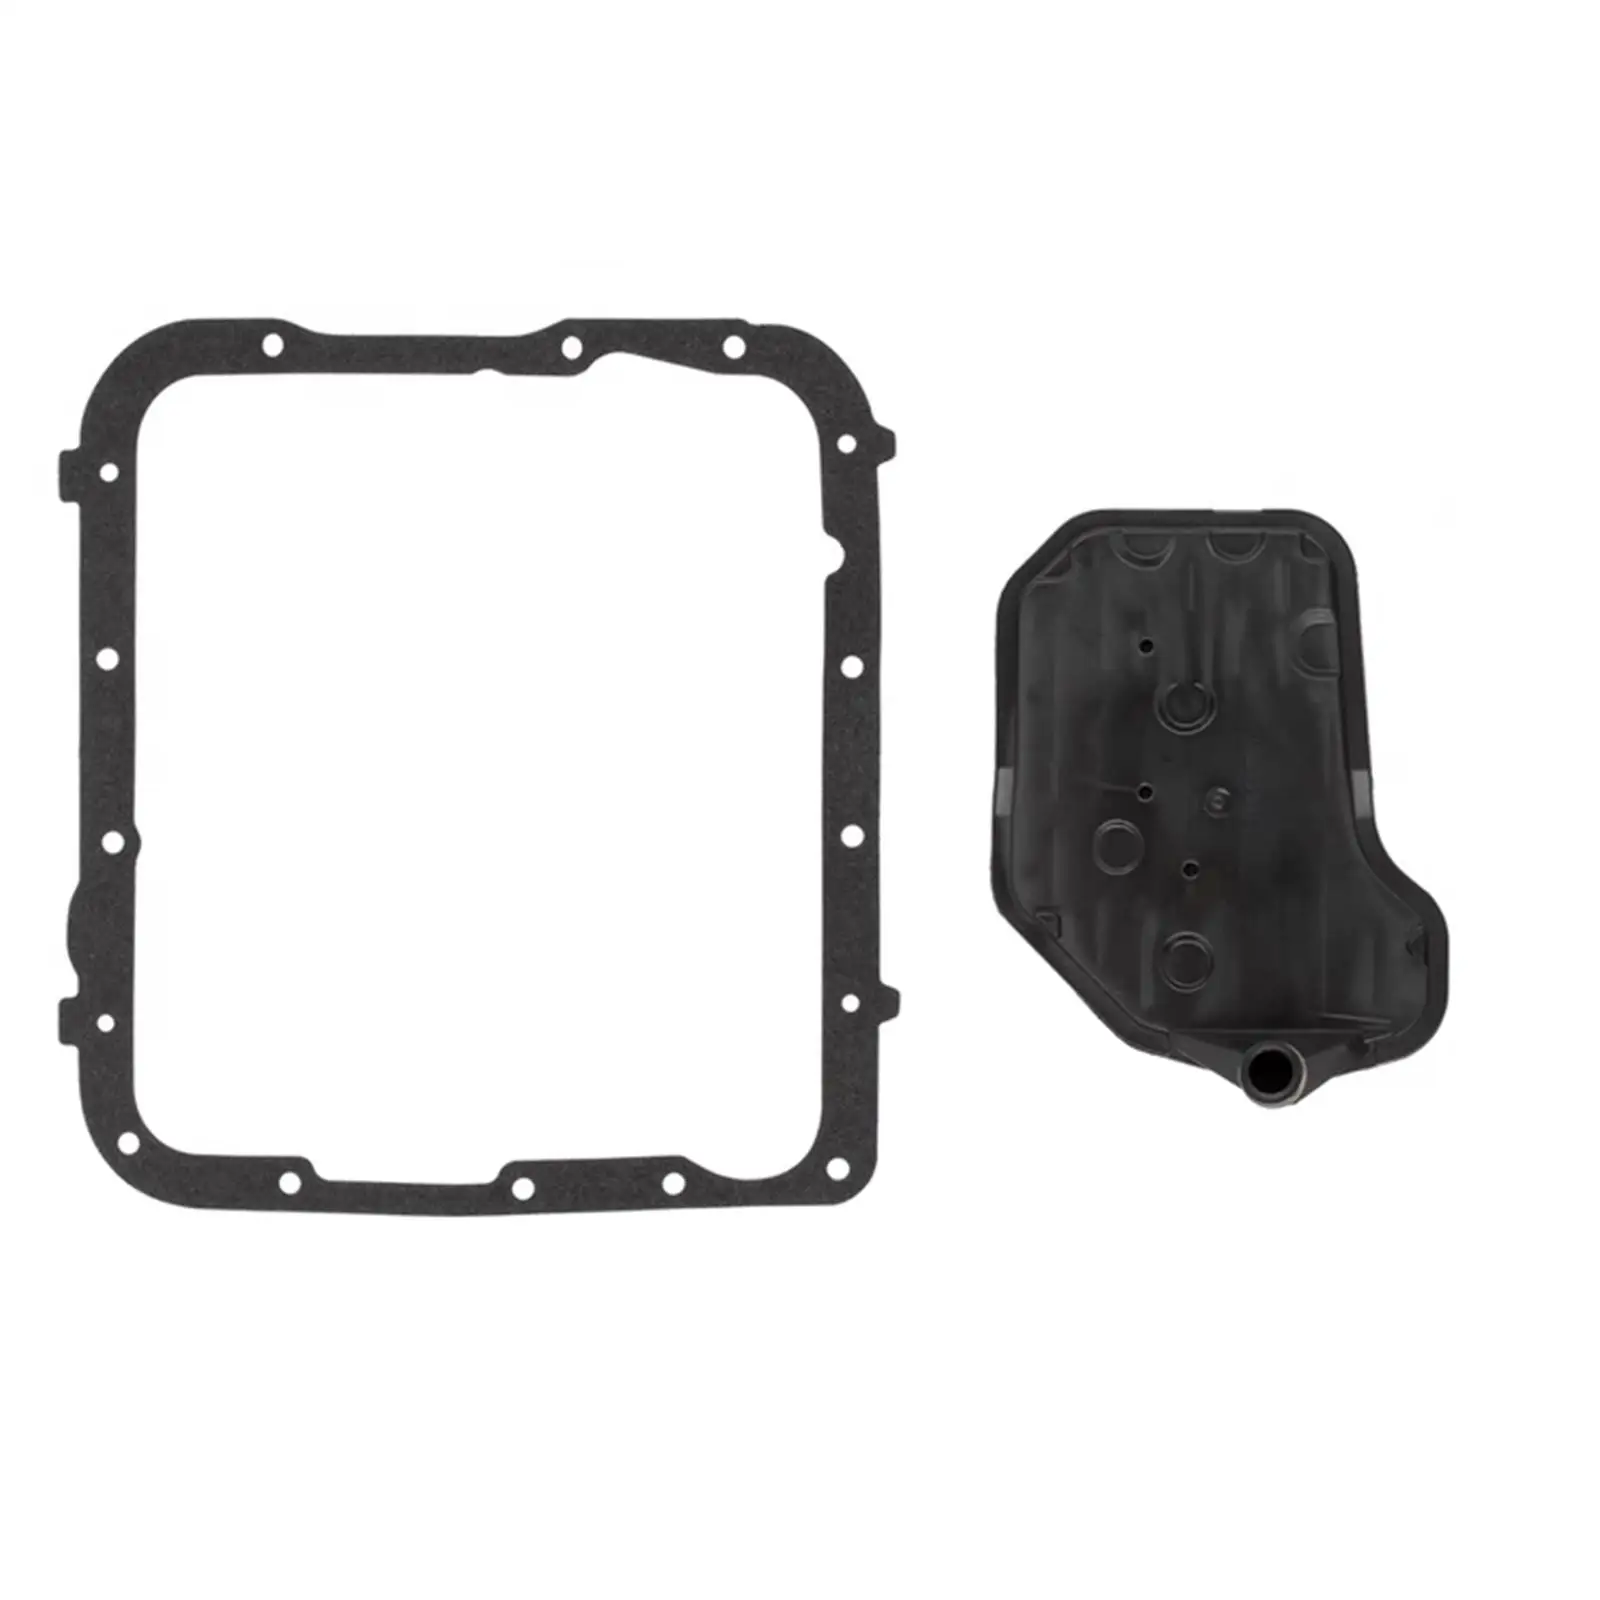 Automatic Transmission Filter with Gasket 24208576 for ft1217B